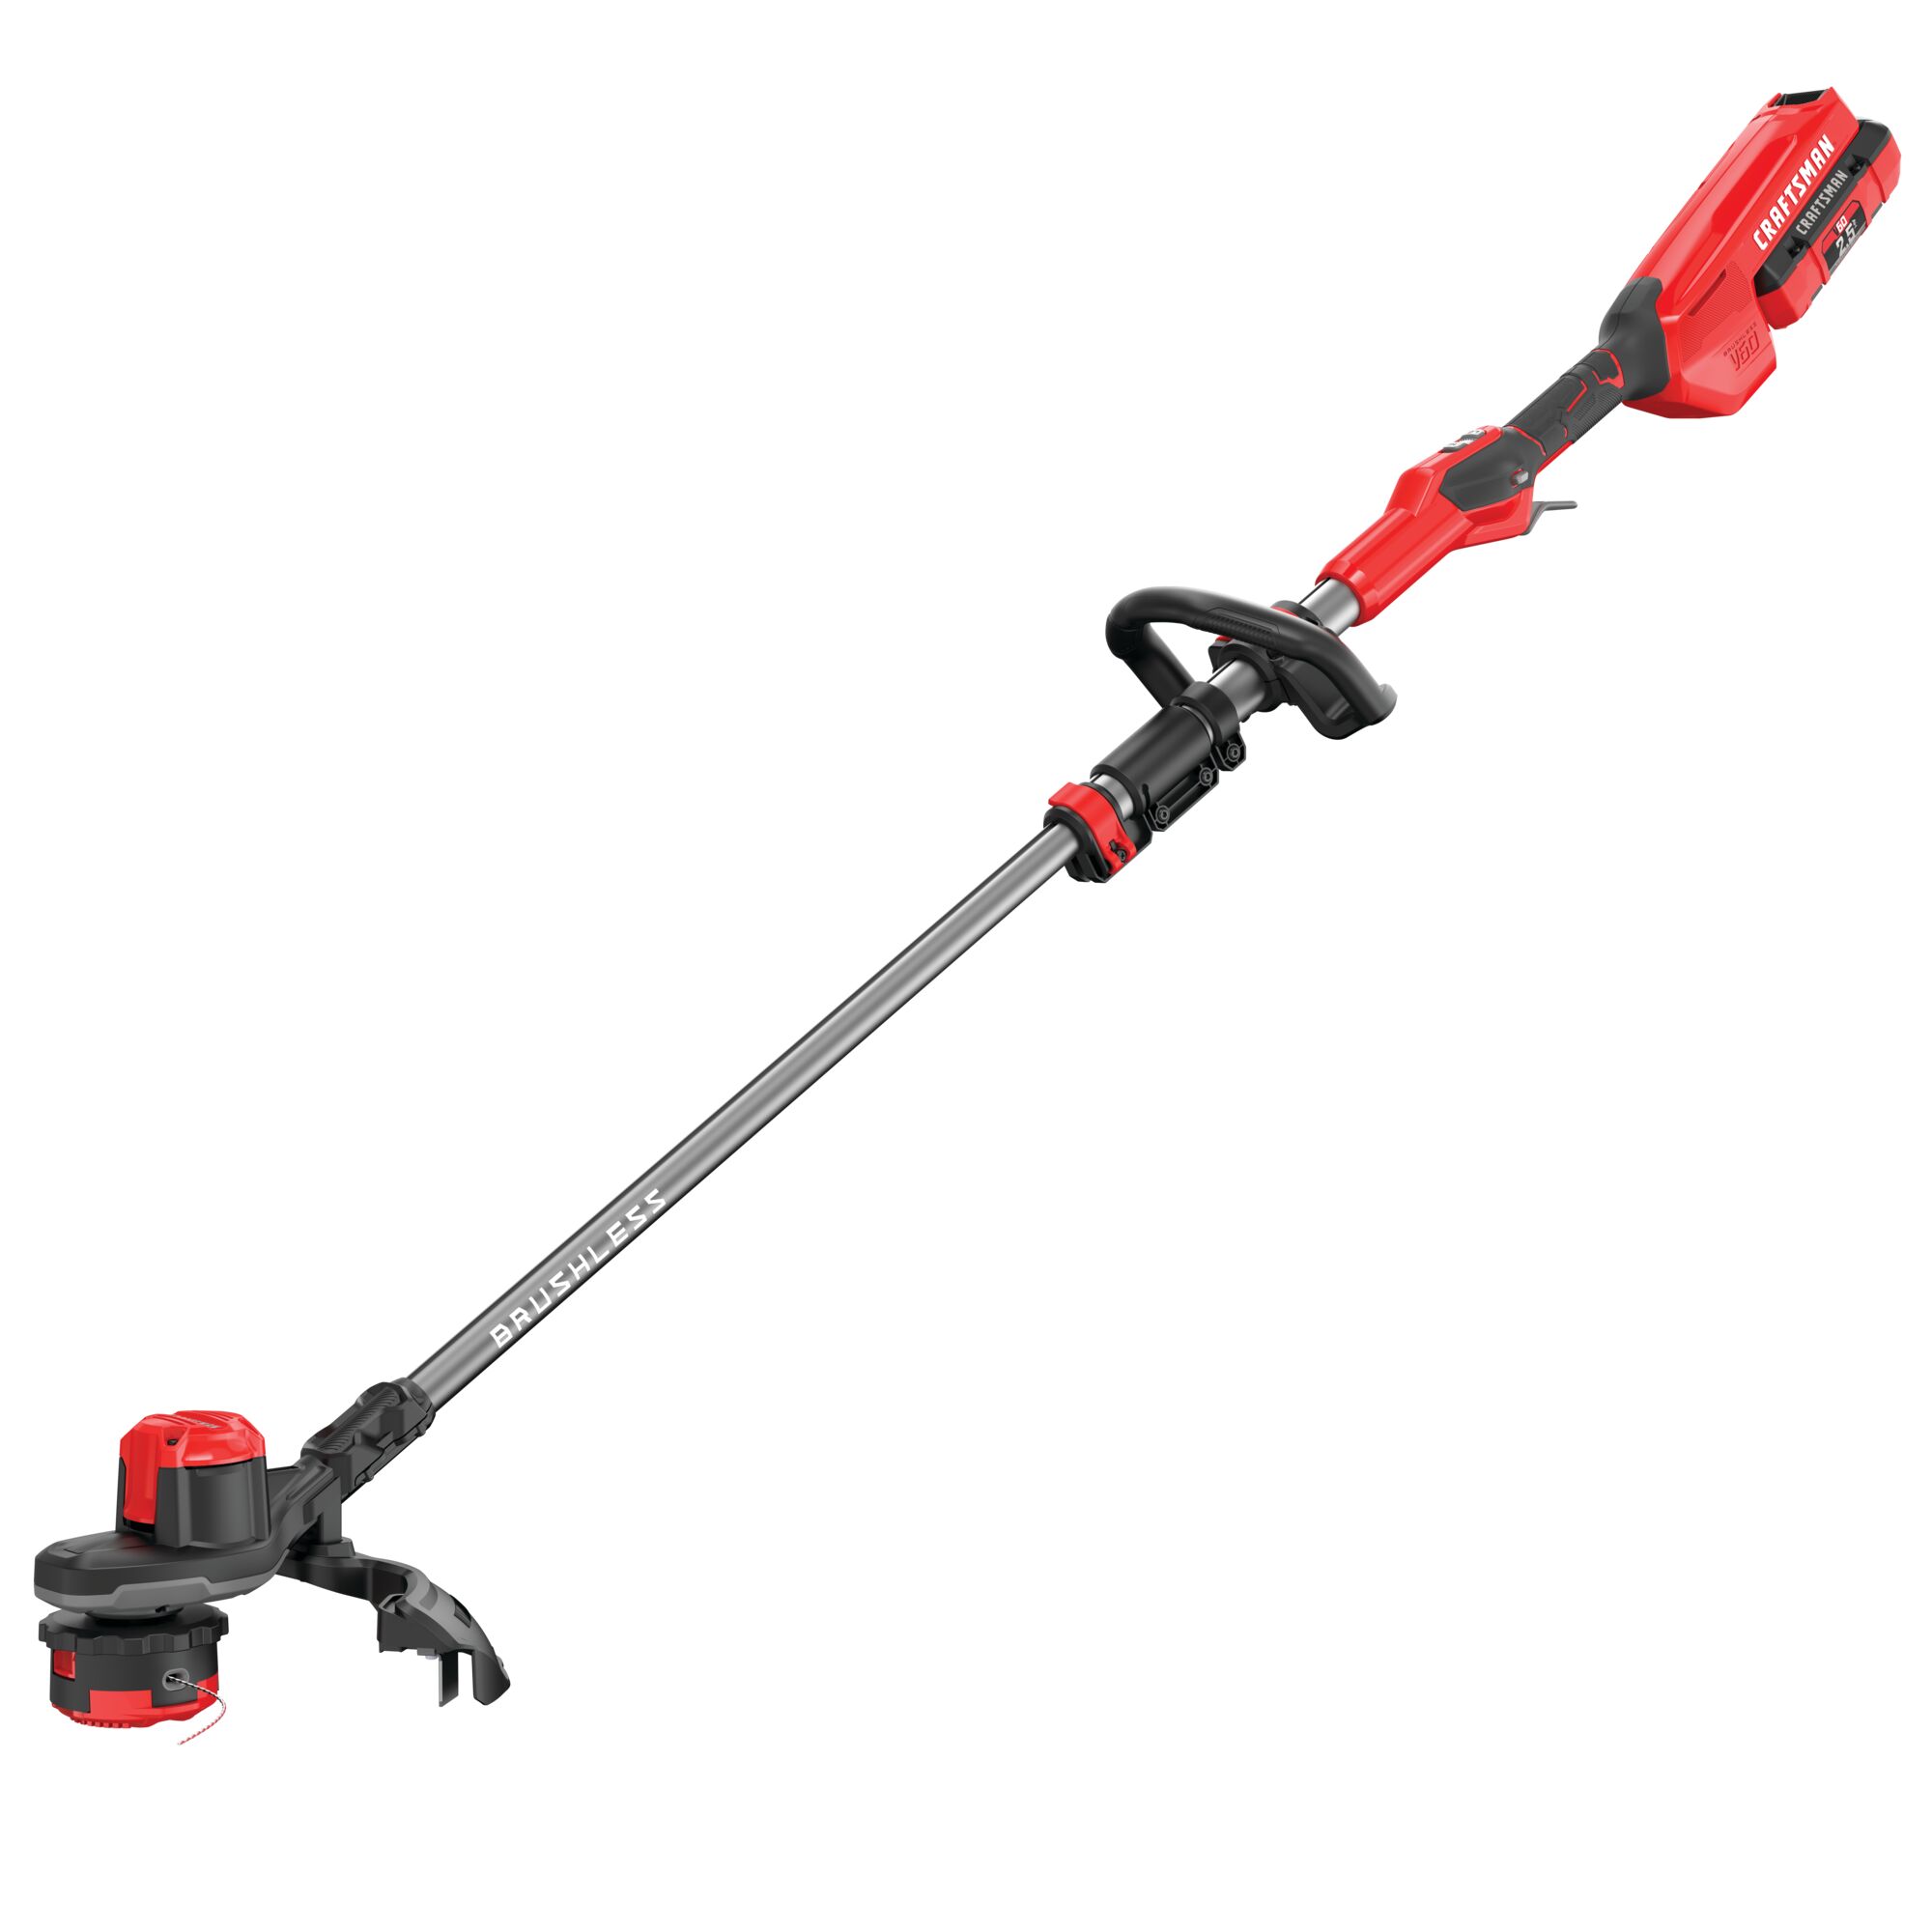 Left profile of 60 volt cordless 15 inch brushless weedwacker string trimmer with quickwind kit 2.5 ampere per hour.